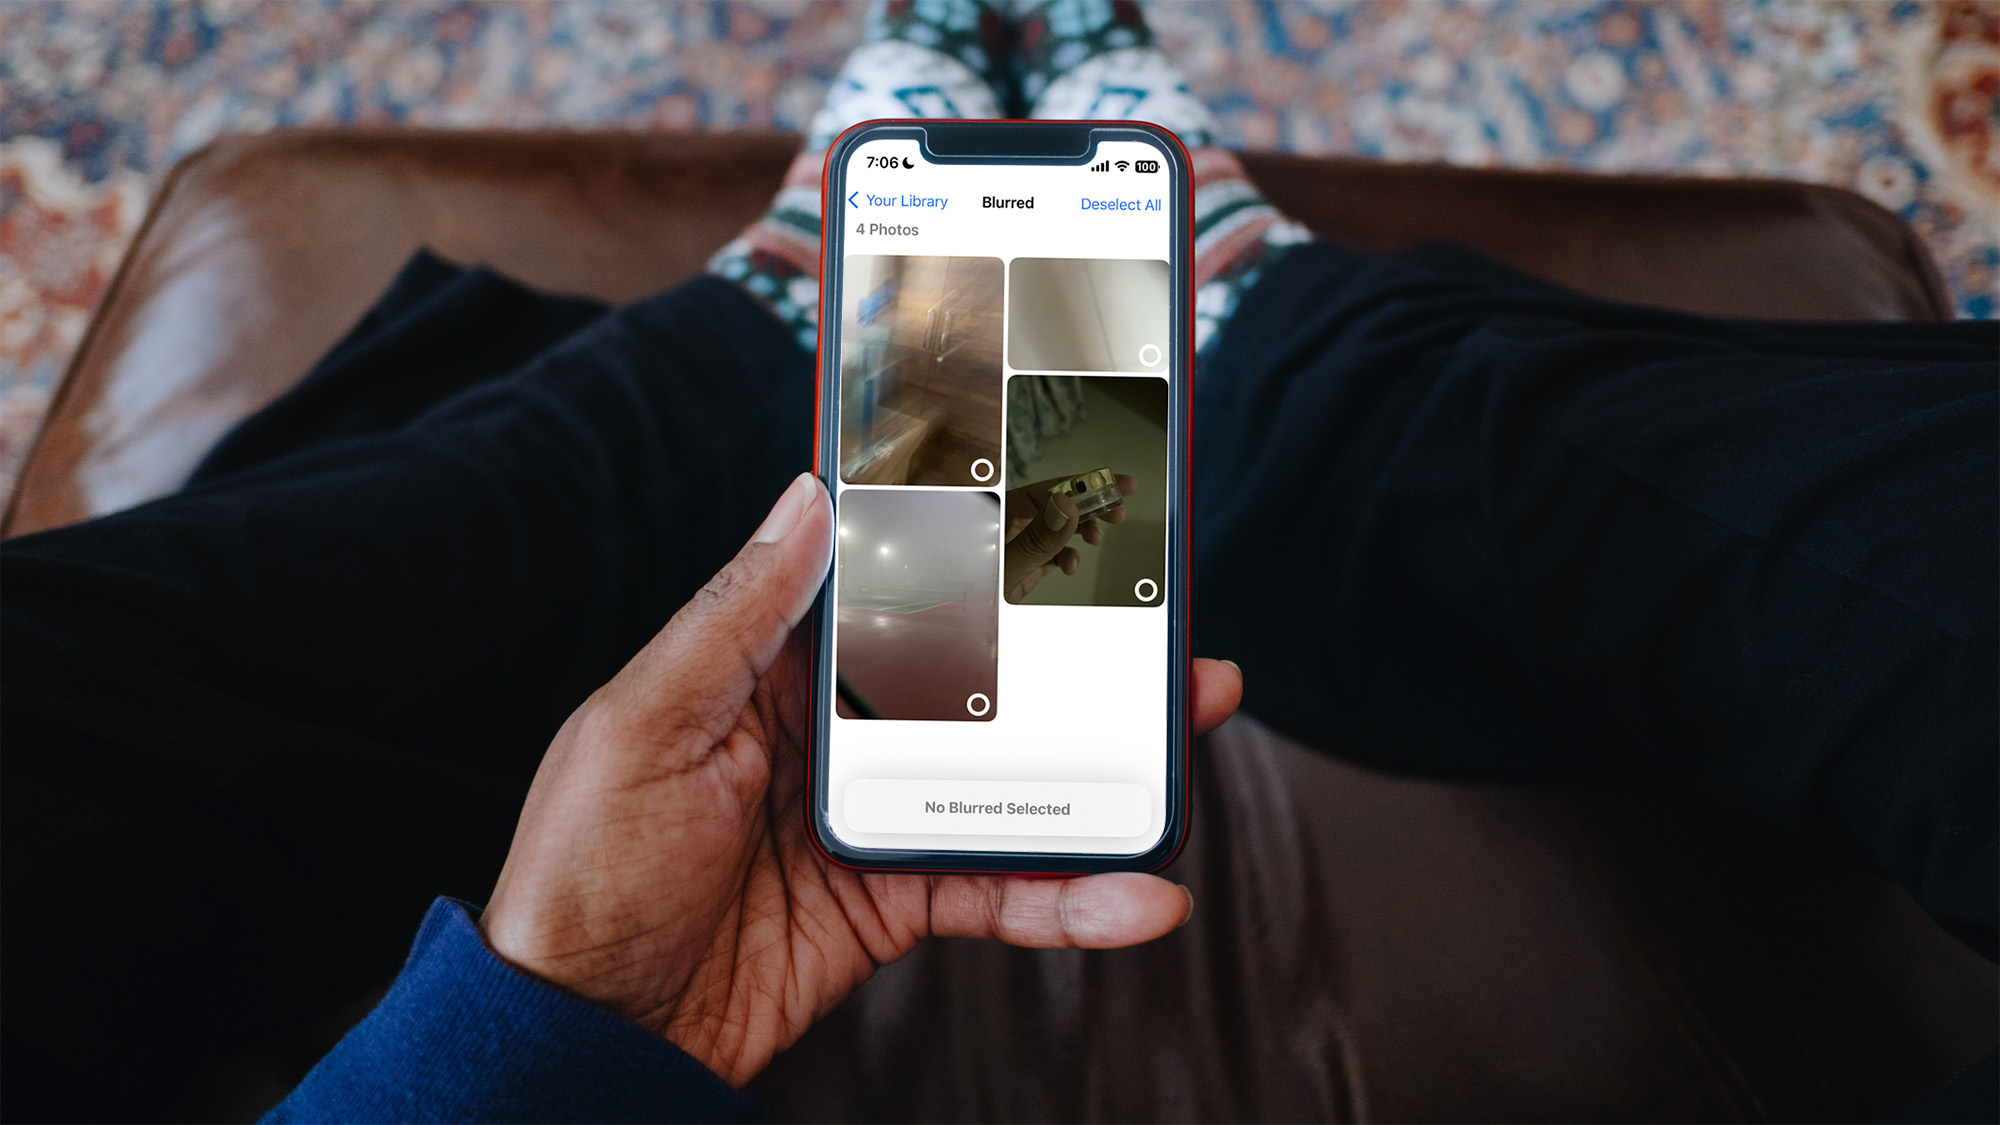 Blurry photos are wasting space on your phone — how to find and delete them